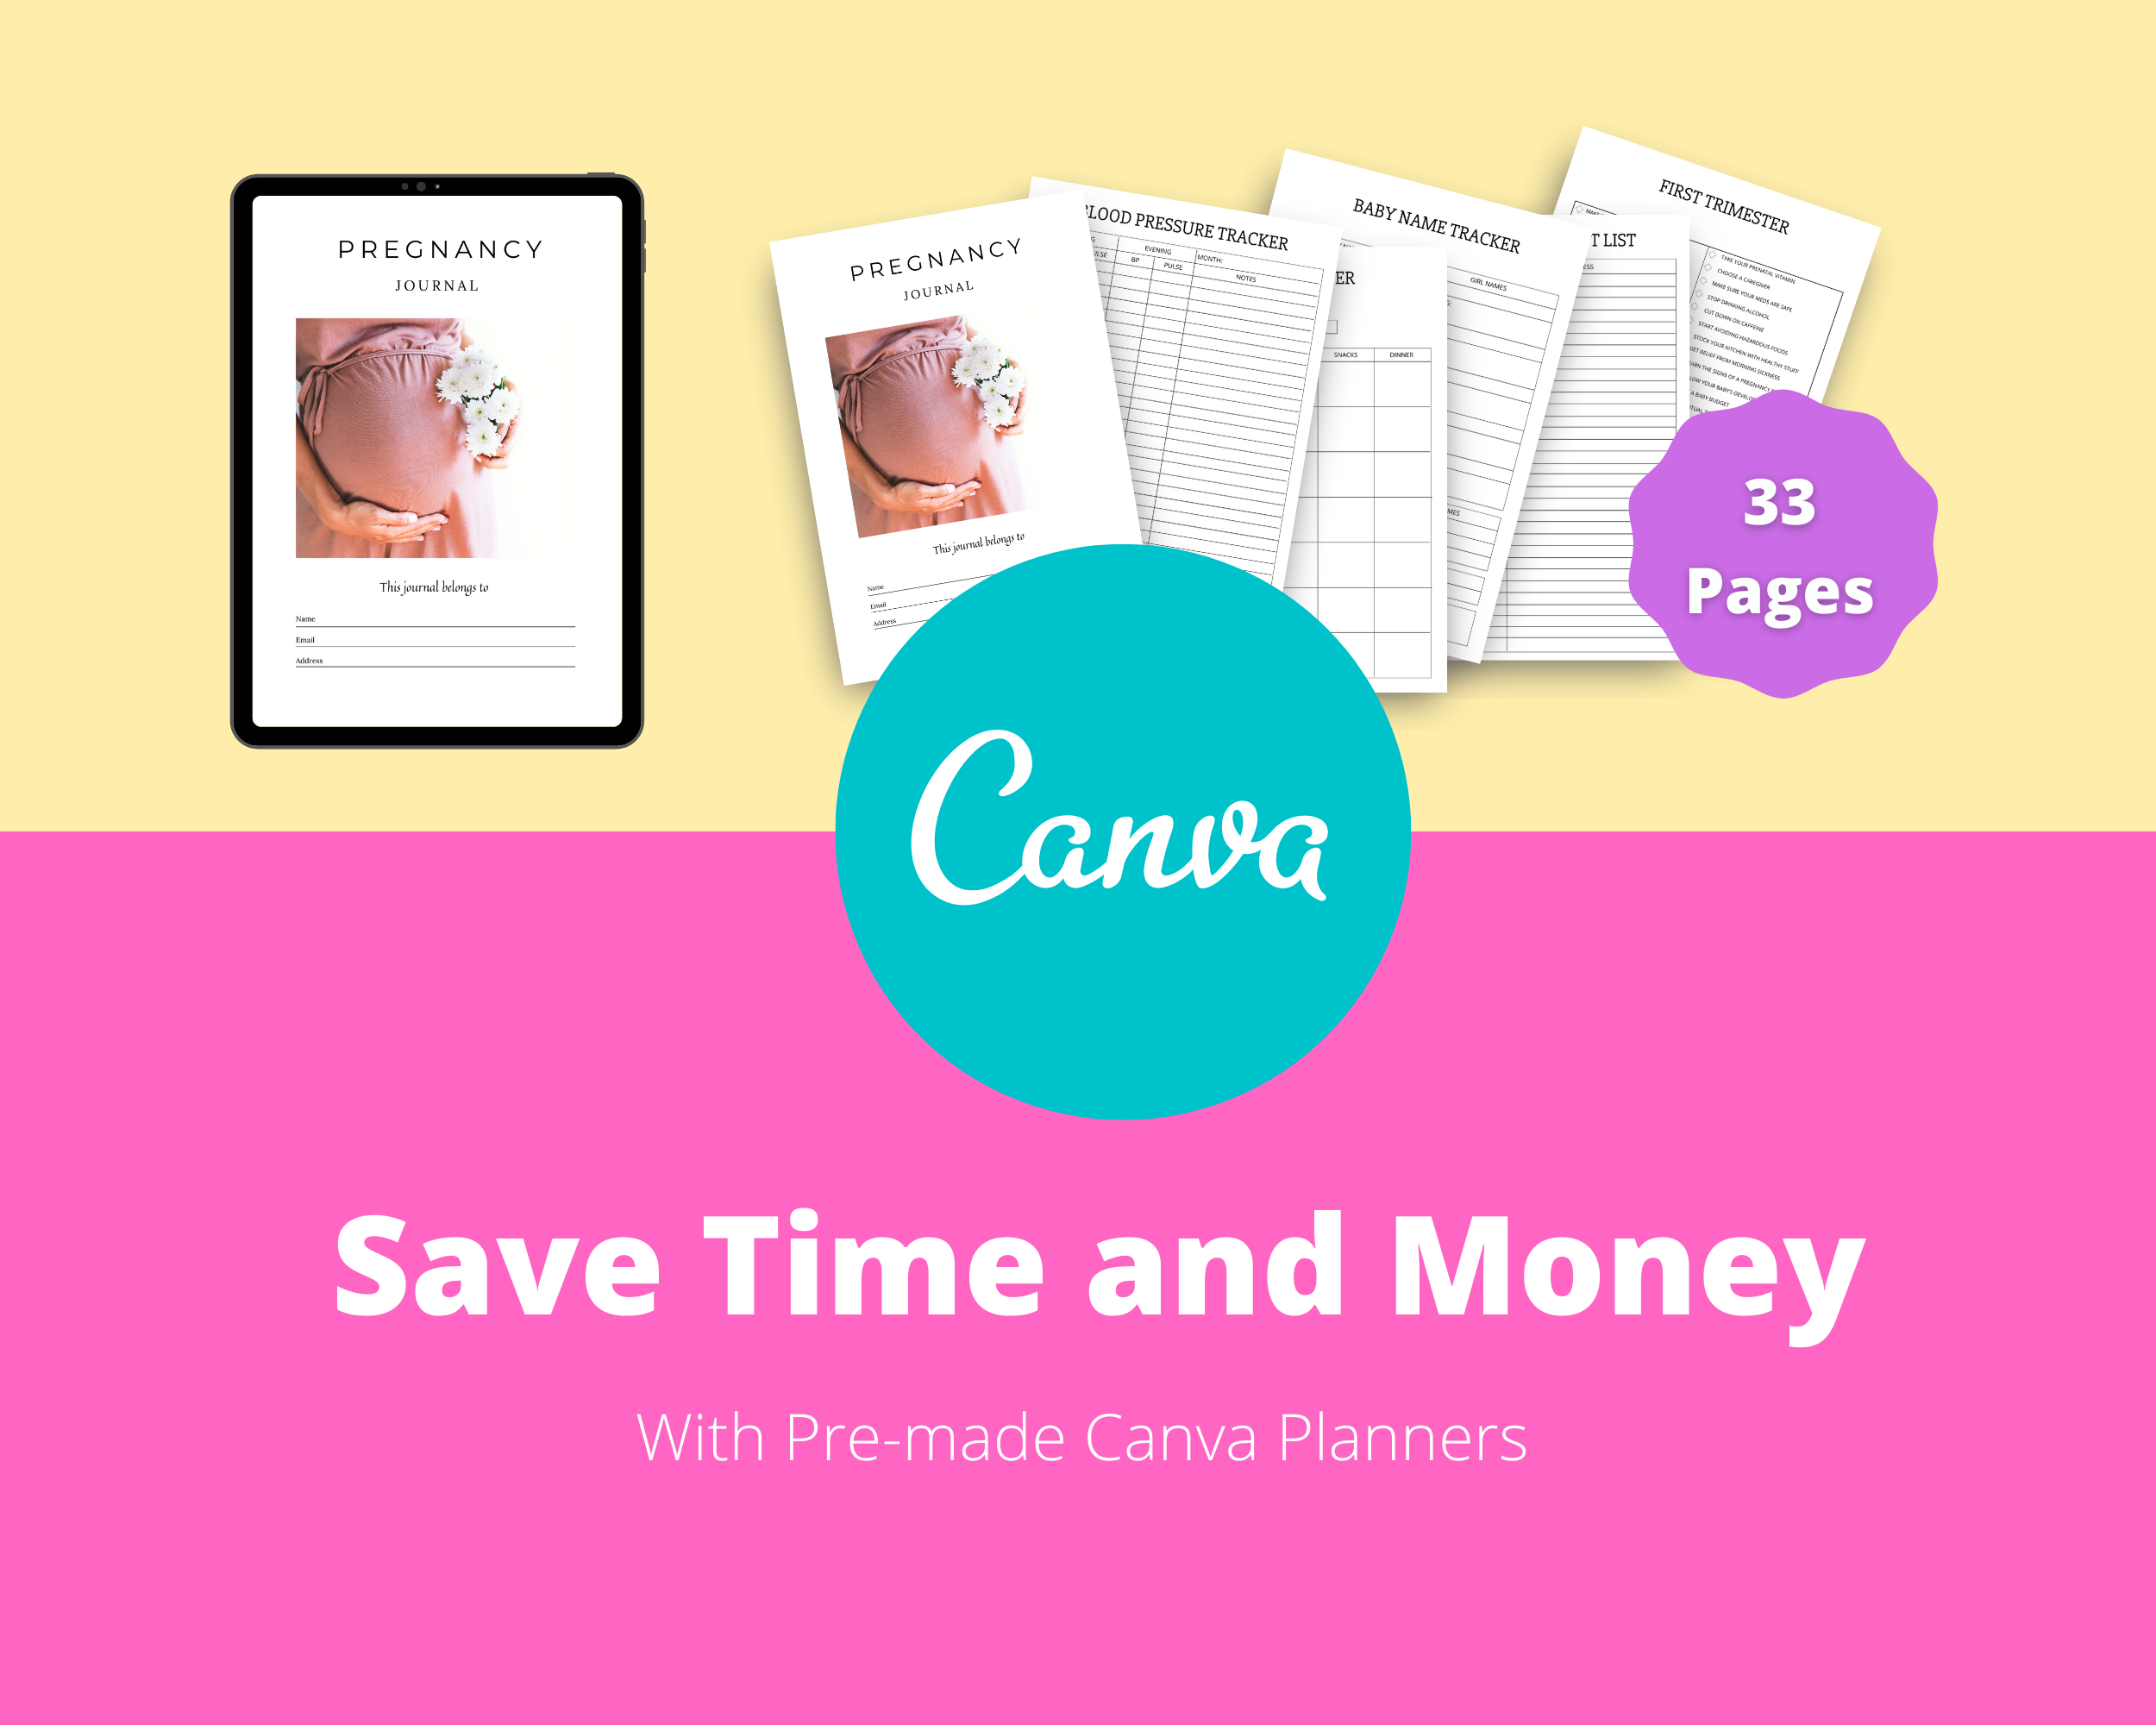 BUNDLE of 7 Female Planners in Canva | Customizable | Editable Canva Templates | Commercial Use | Pregnancy Planners